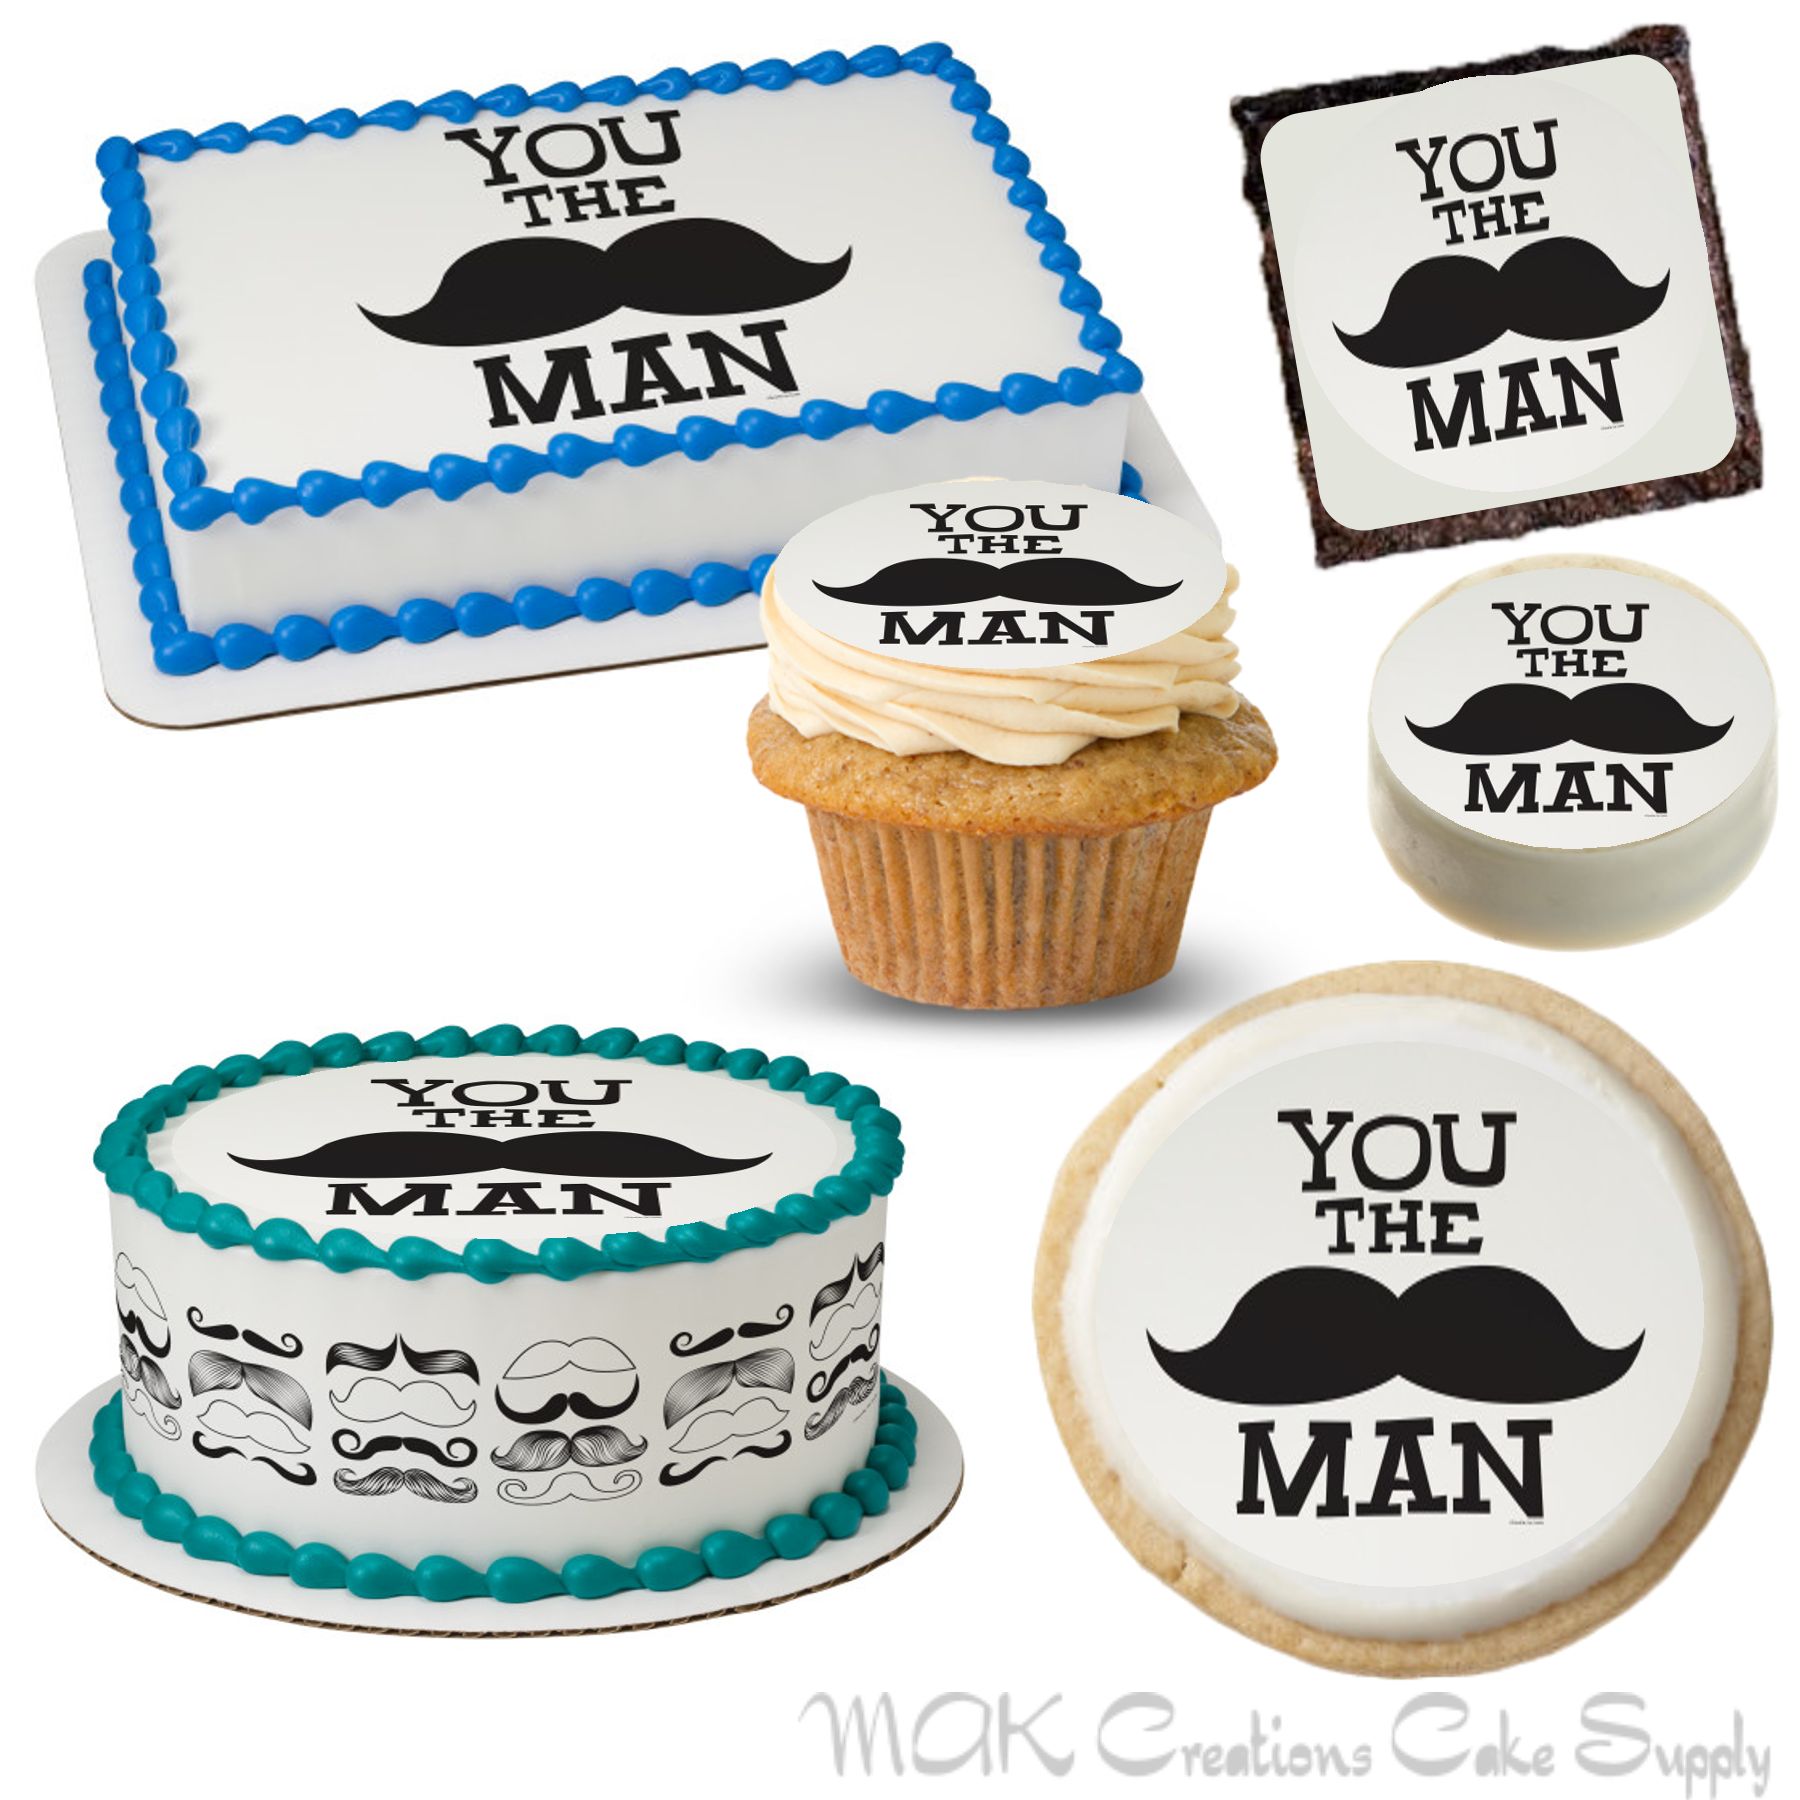 Manly moustache cake | Order Online | Oh My Cake!